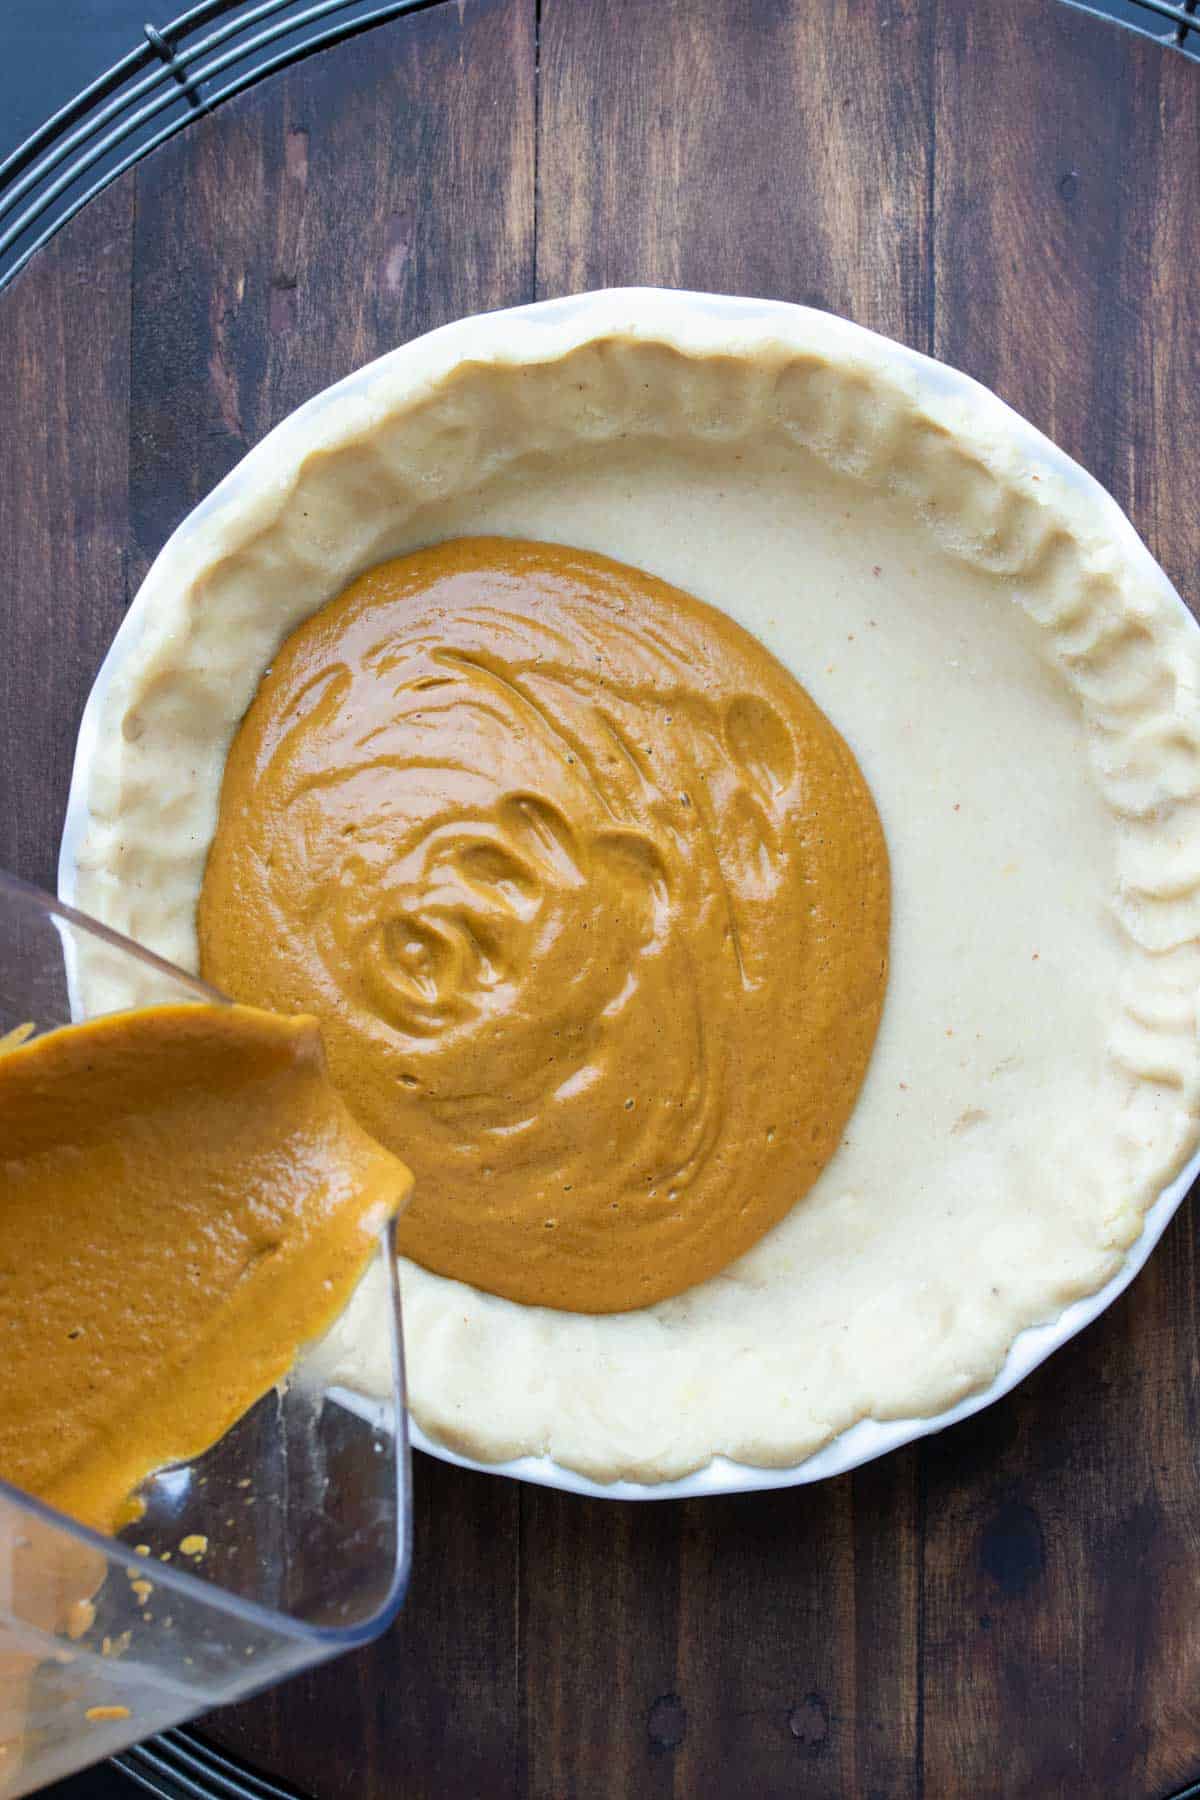 Pumpkin pie filling being poured into a pie crust